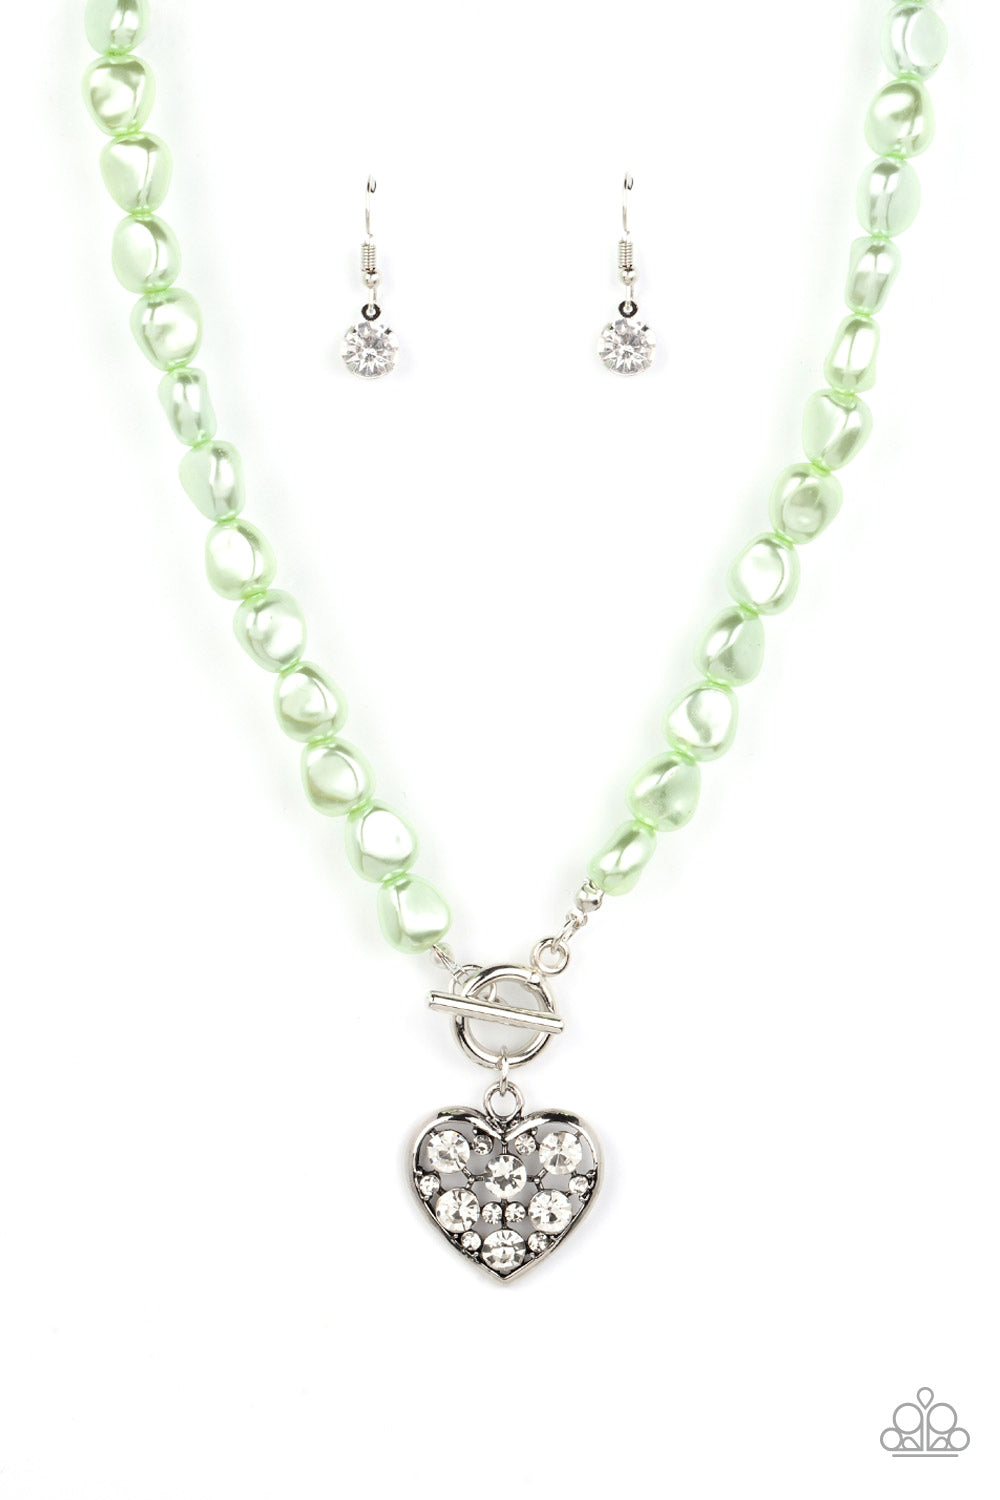 Color Me Smitten Green Necklace - Paparazzi Accessories  An imperfect collection of pearly green beads are threaded along an invisible wire below the collar, creating a colorful display. Dotted in glittery white rhinestones, an airy silver heart pendant sparkles at the center for a flirtatious finish. Features a toggle closure.  Sold as one individual necklace. Includes one pair of matching earrings.  P2RE-GRXX-264XX